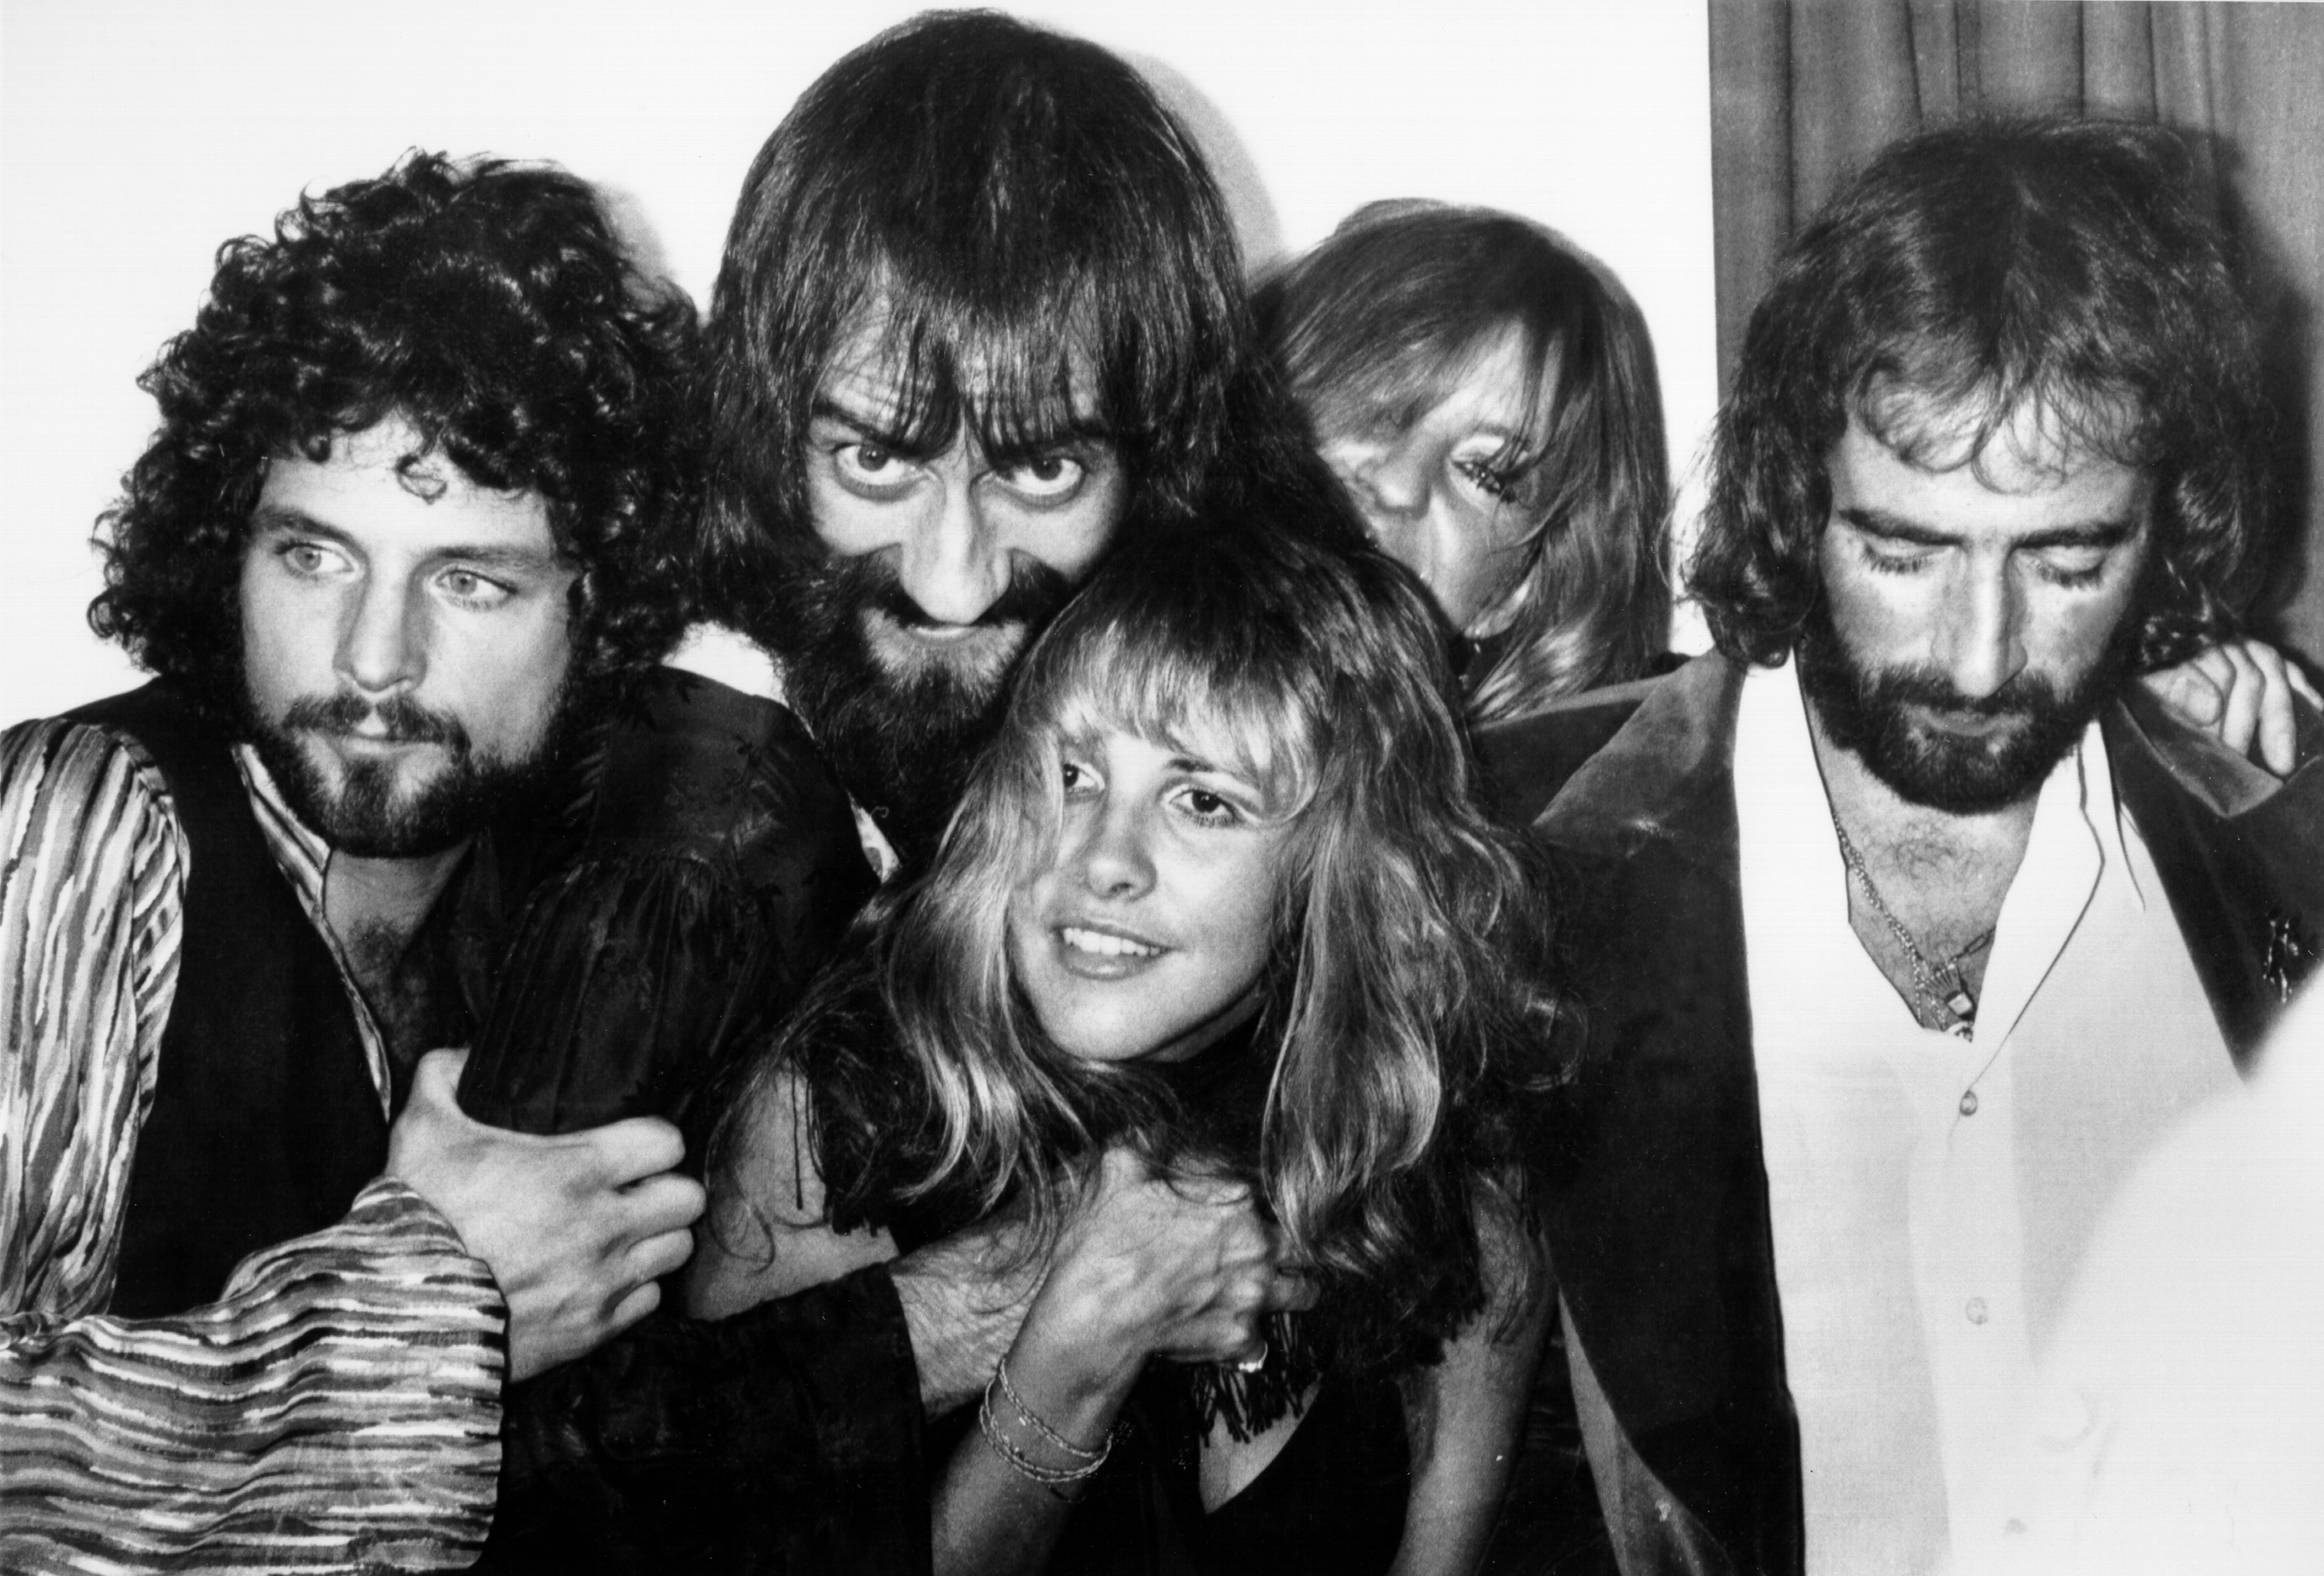 A black and white picture of Fleetwood Mac's Lindsey Buckingham, Mick Fleetwood, Stevie Nicks, Christine McVie, and John McVie posing close together.